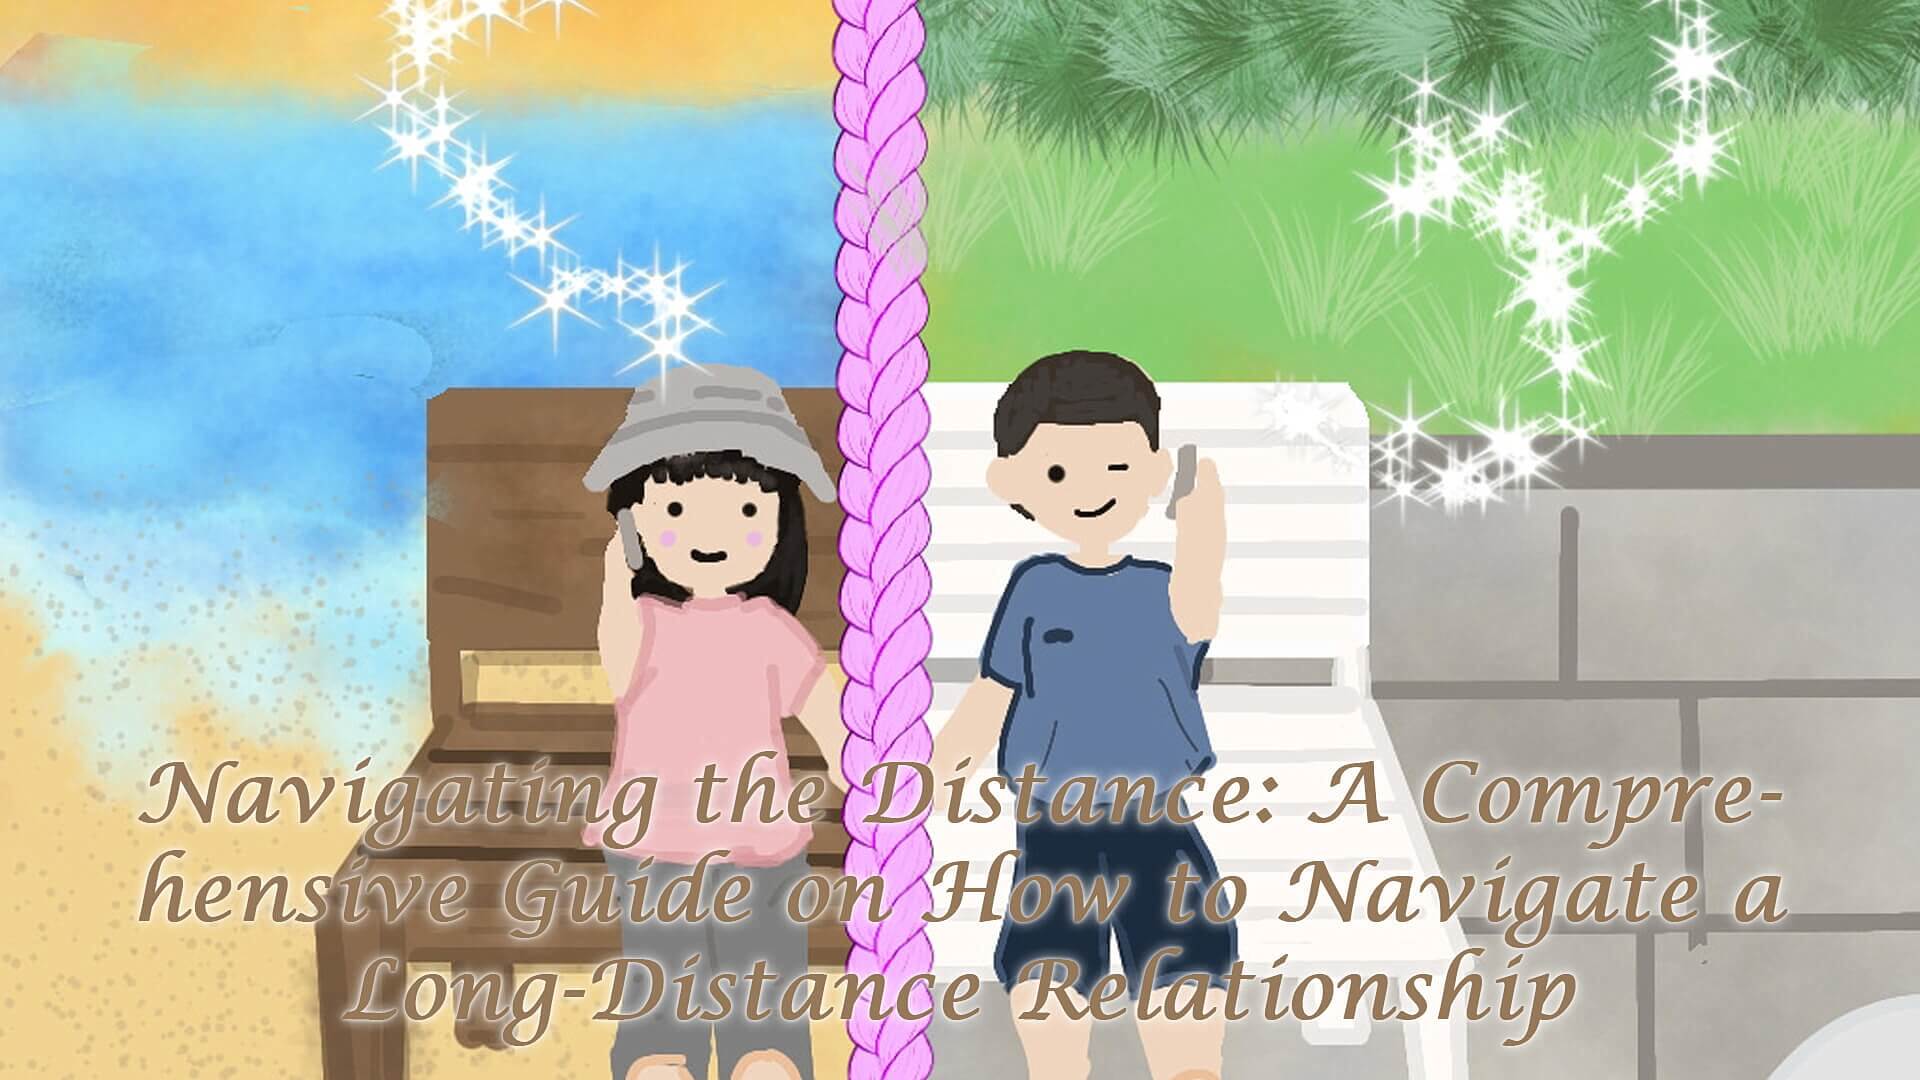 A Comprehensive Guide on How to Navigate a Long-Distance Relationship